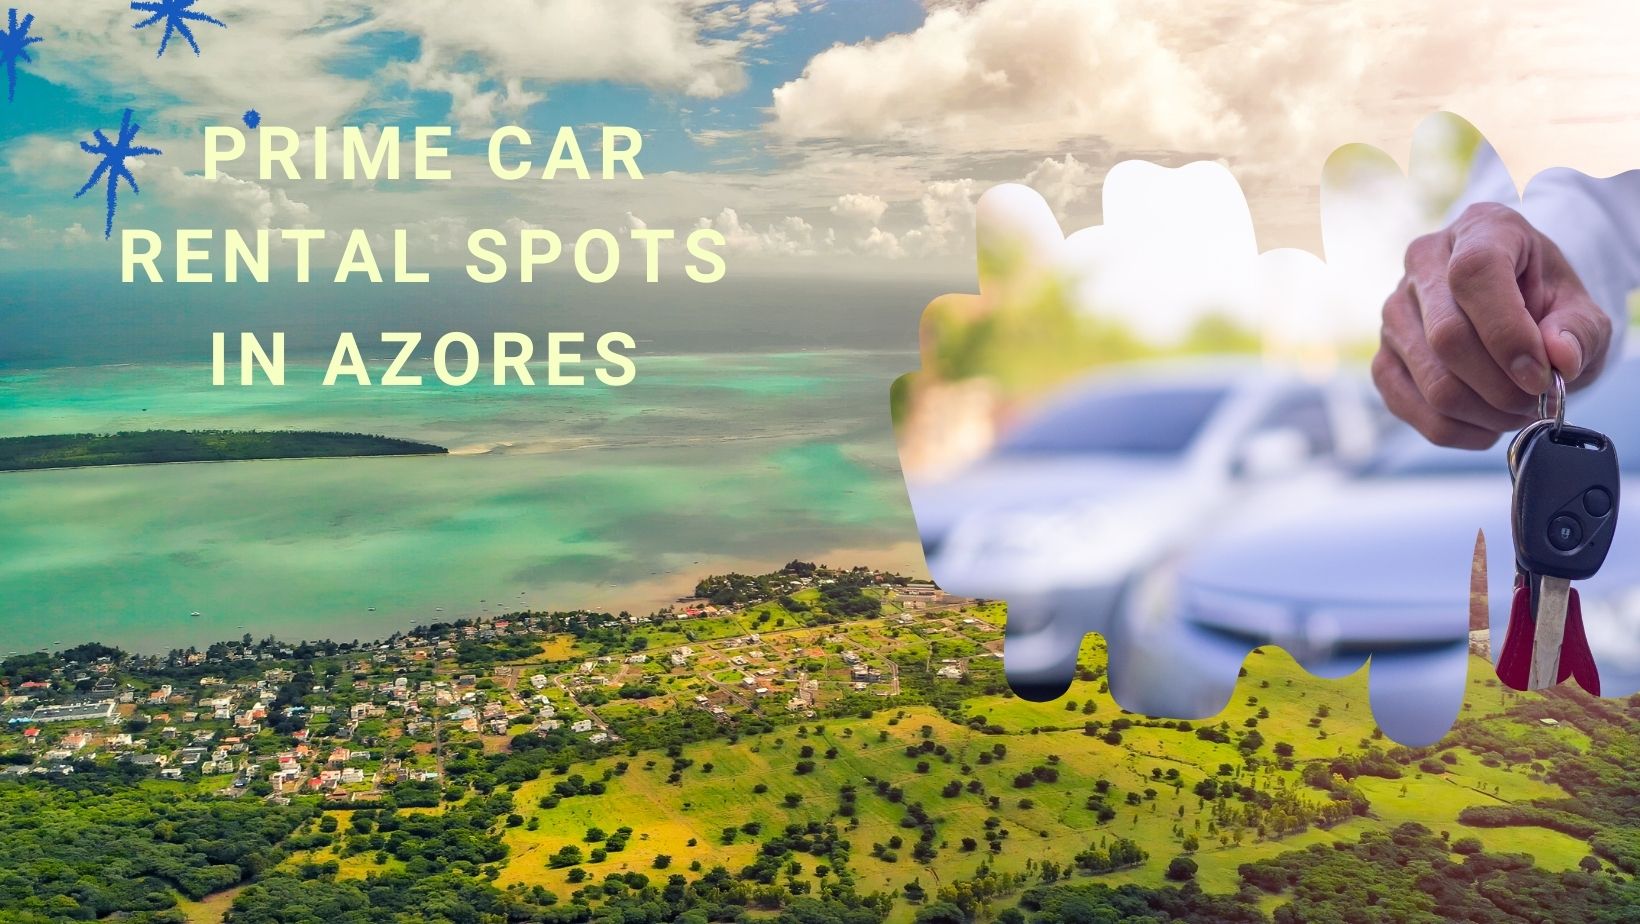 Azores central car rental stations